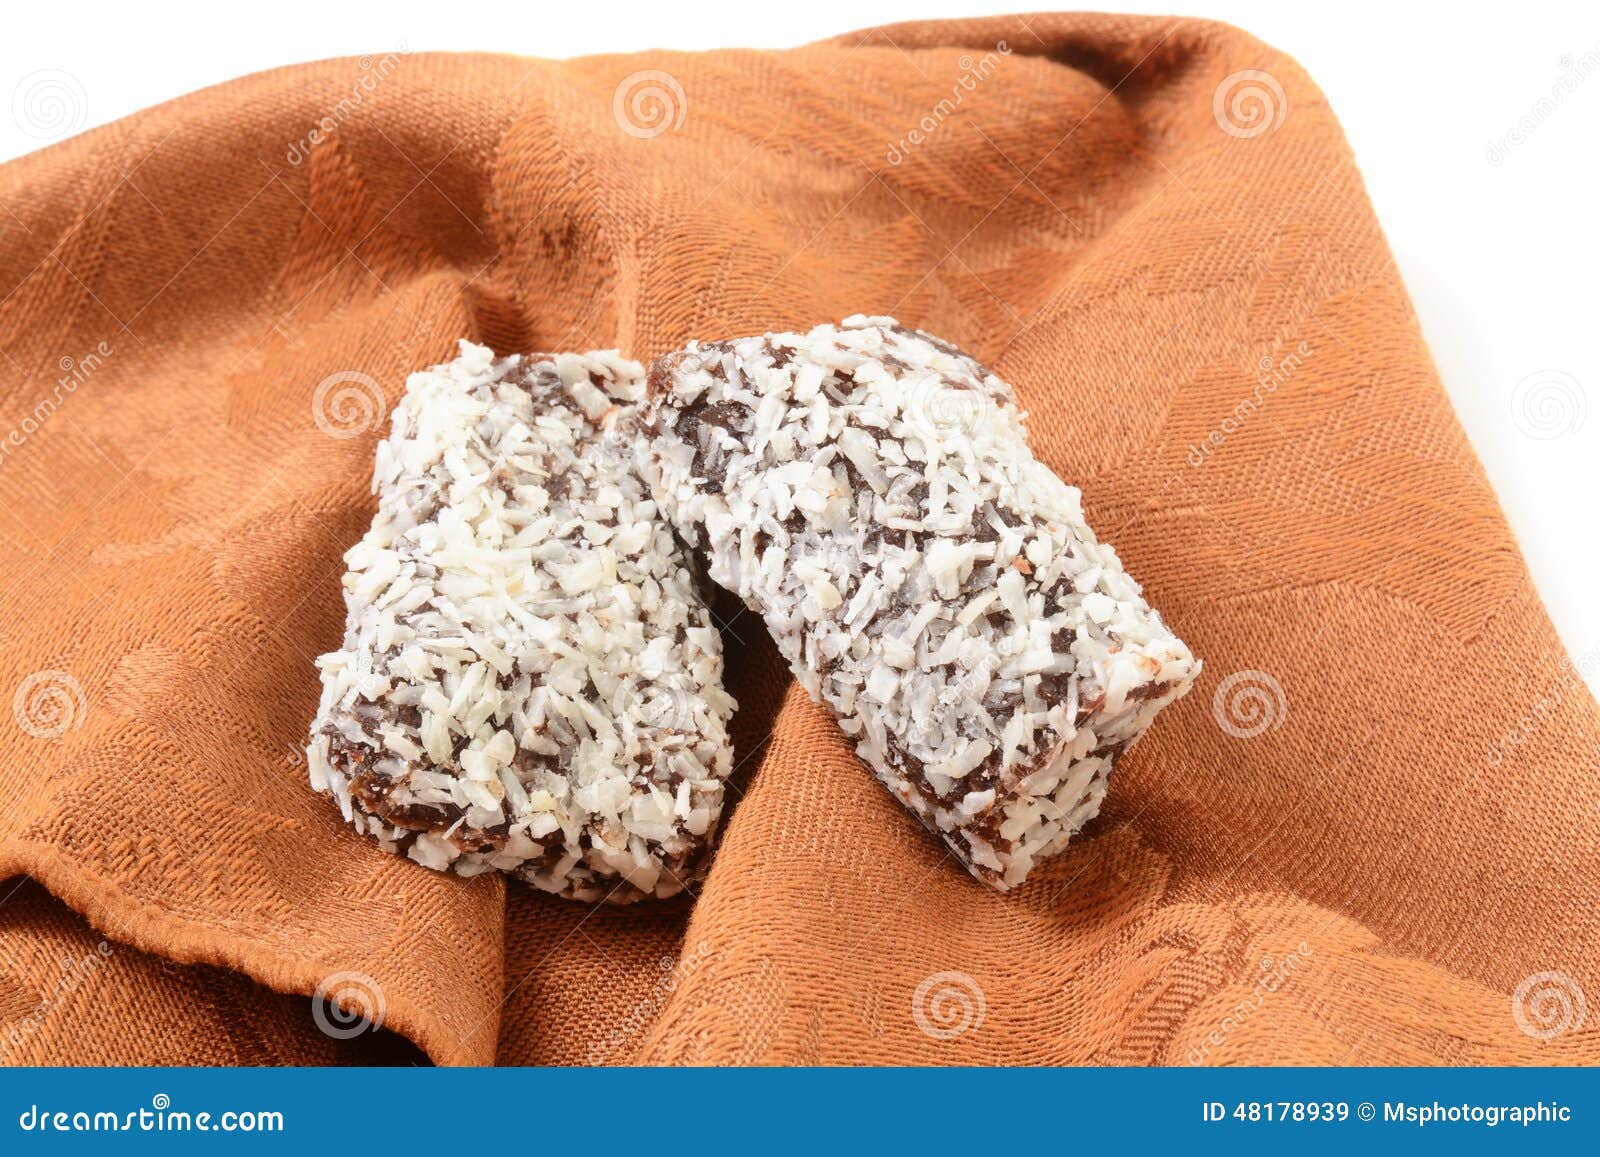 Coconut date rolls. Delicious, healthy date rolls with coconut shavings